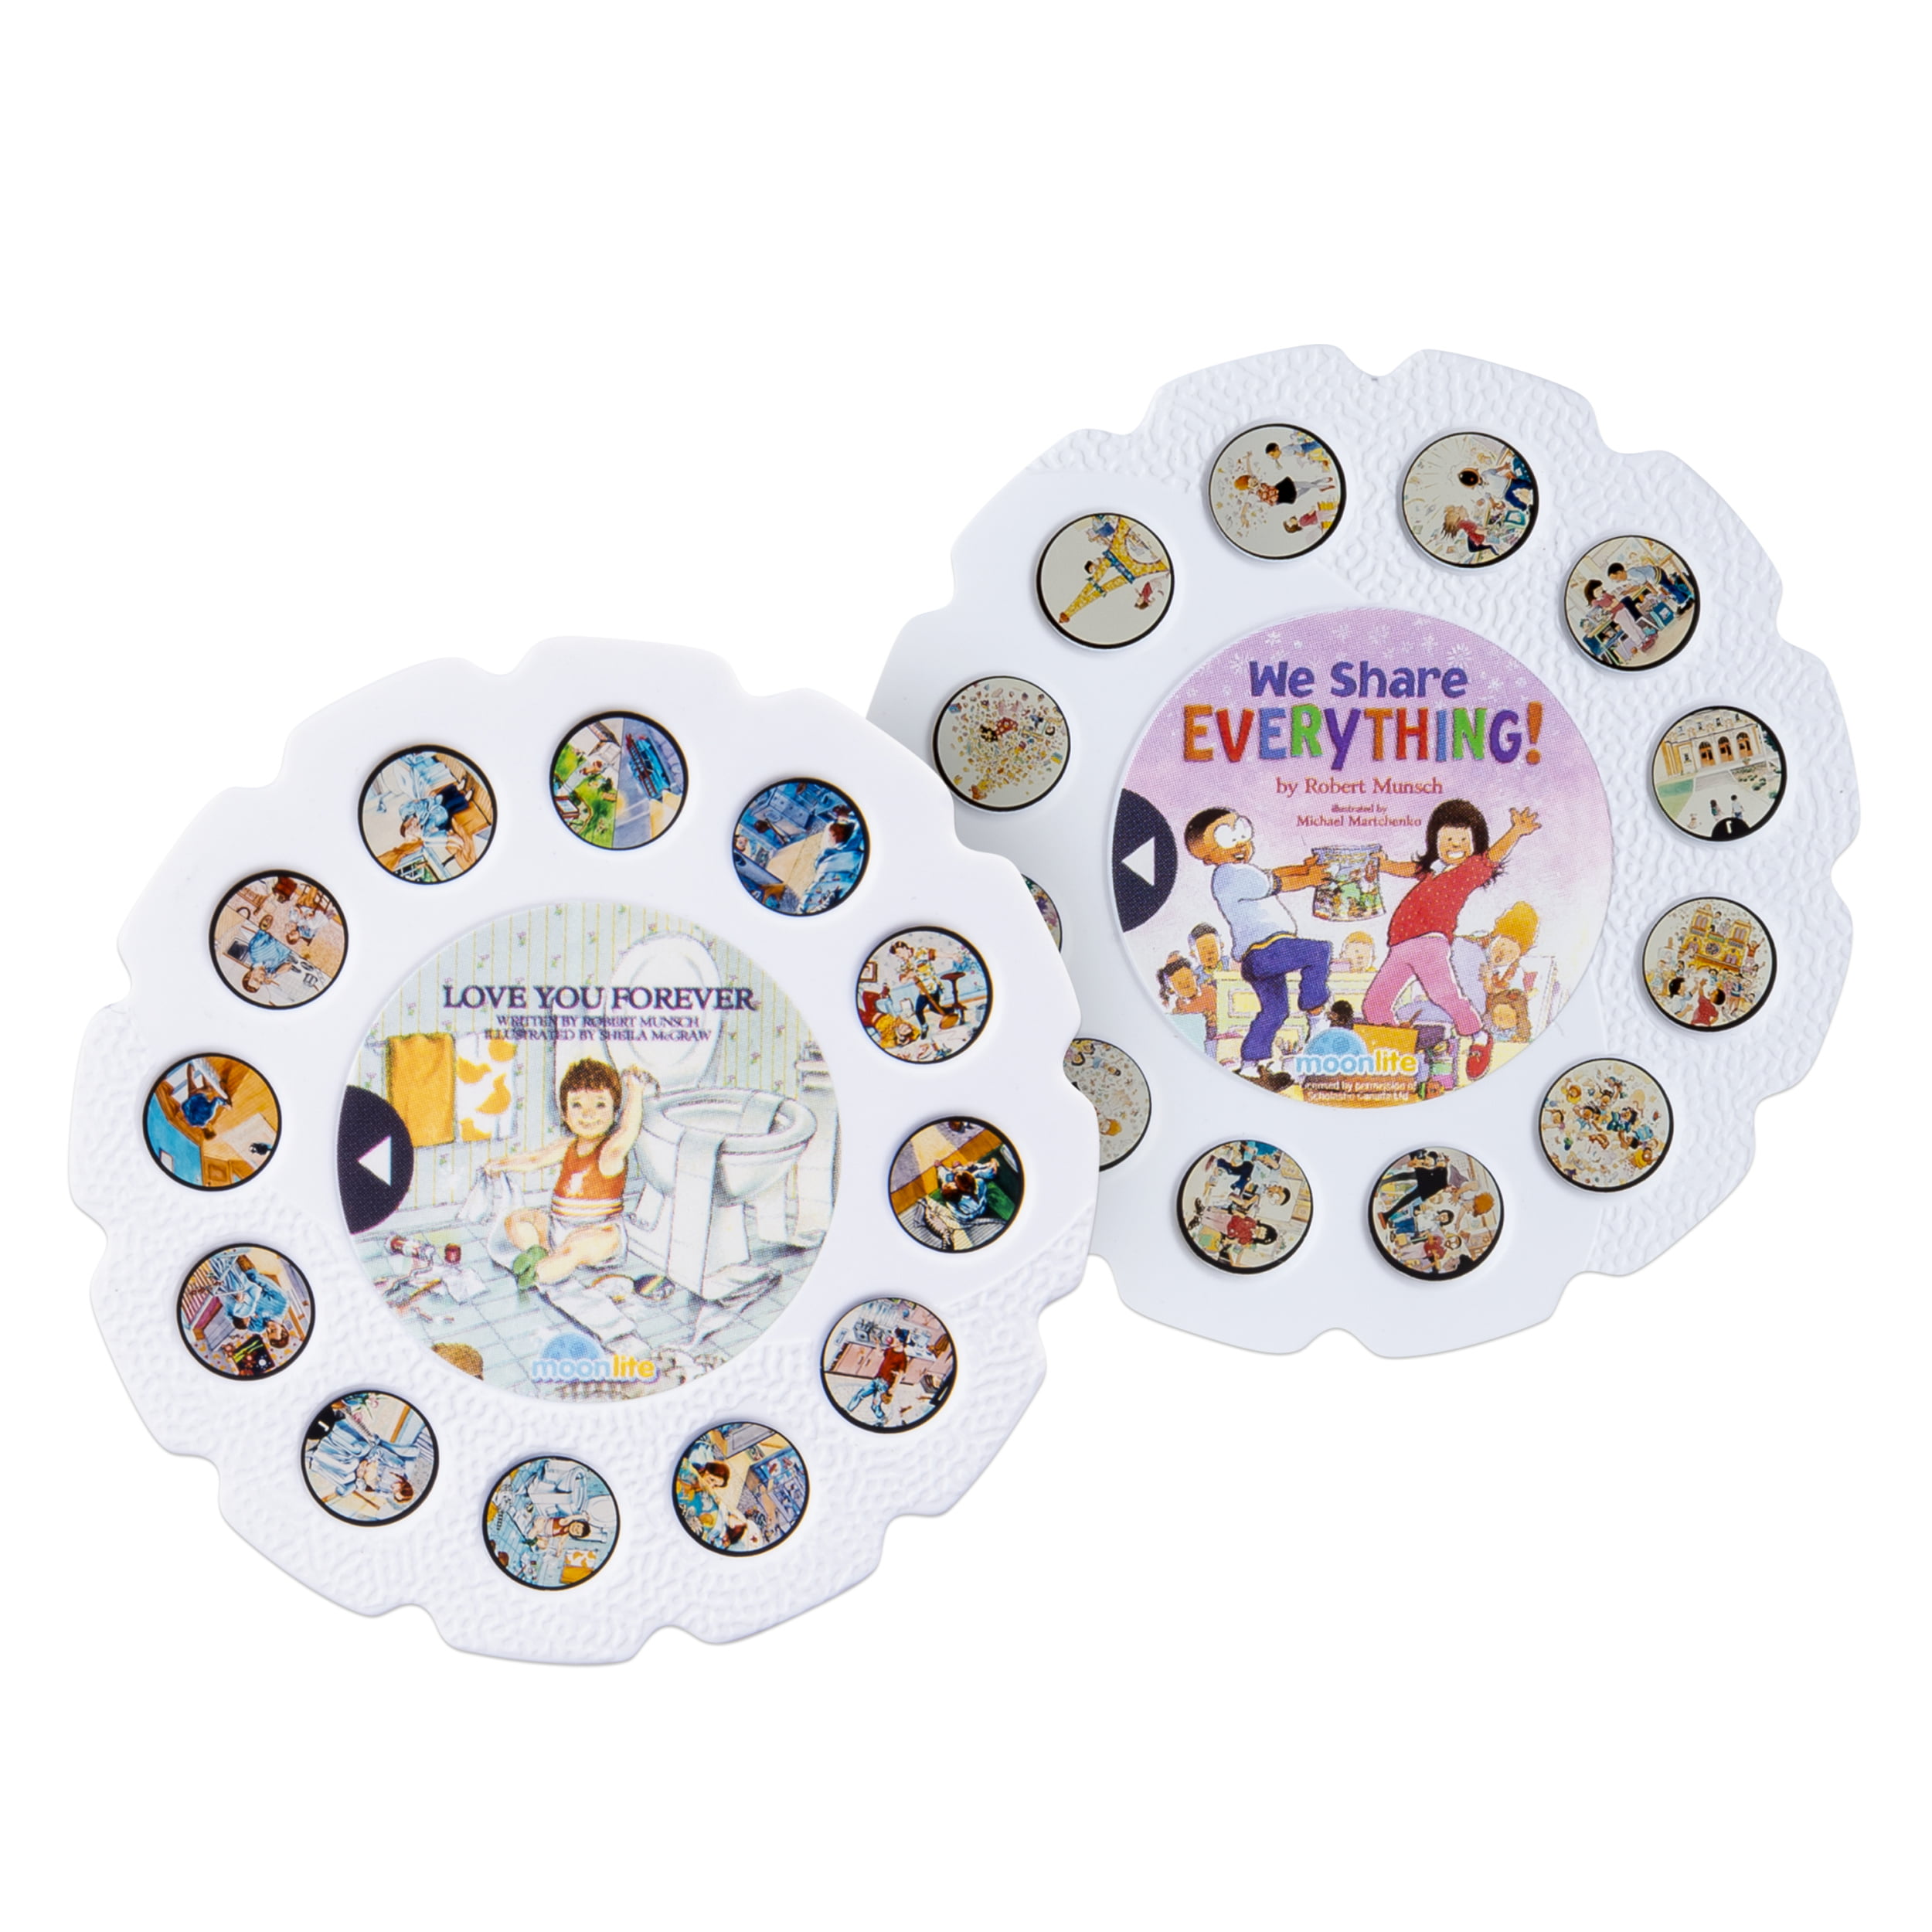 Moonlite - Robert Munsch Intermediate Starter Pack, Storybook Projector for  Smartphones with 2 Story Reels, For Ages 3 and Up 